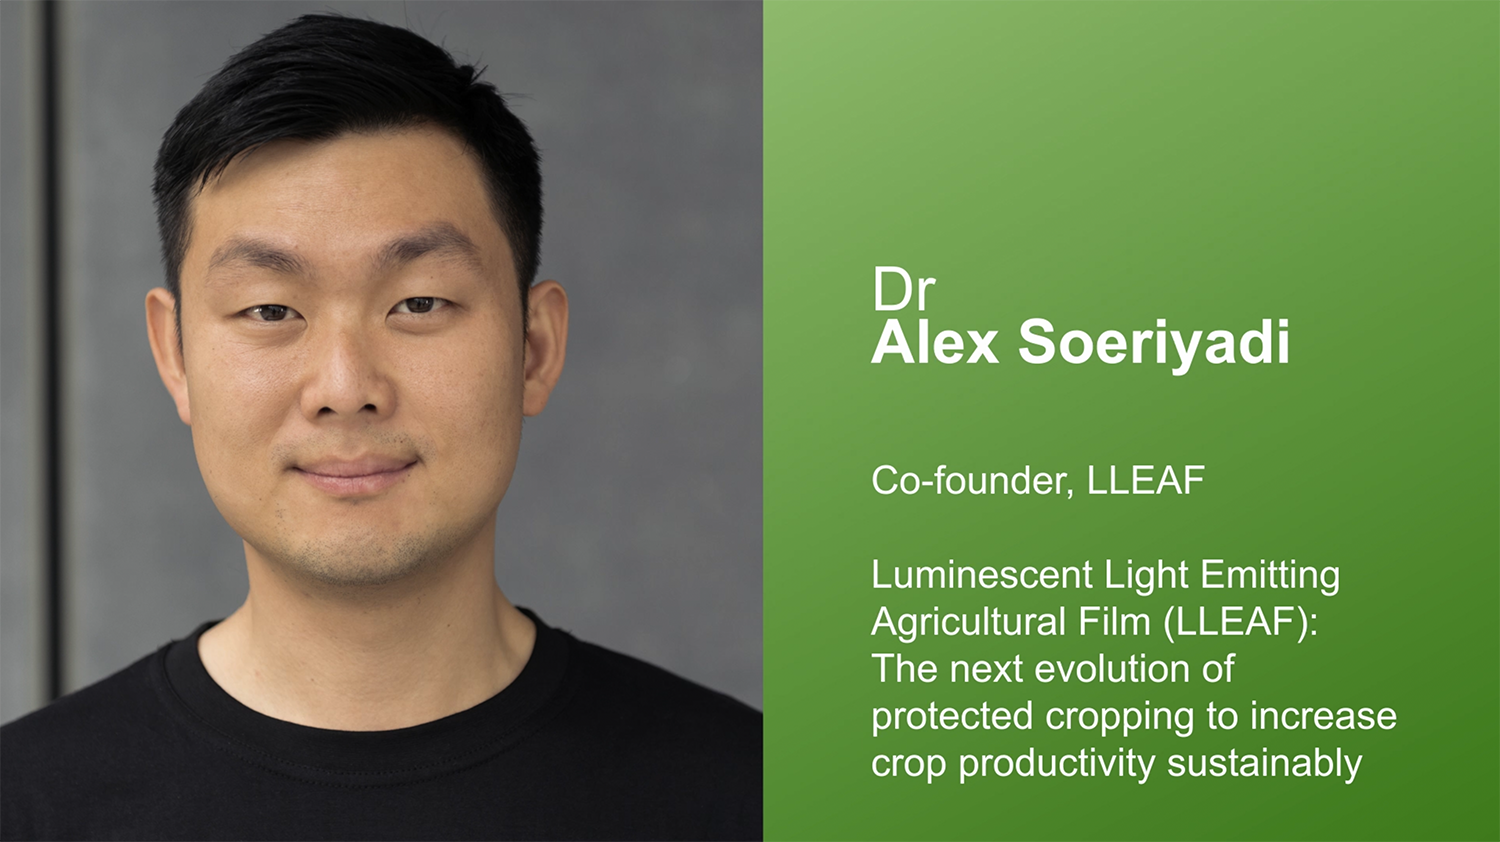 LLEAF P/L CEO Dr Alex Soeriyadi is working with Hort Innovation, DPI and Western Sydney University scientists to trial his prototype agricultural films on glasshouse-grown blueberry and lettuce crops. Here, he explains how it all works.